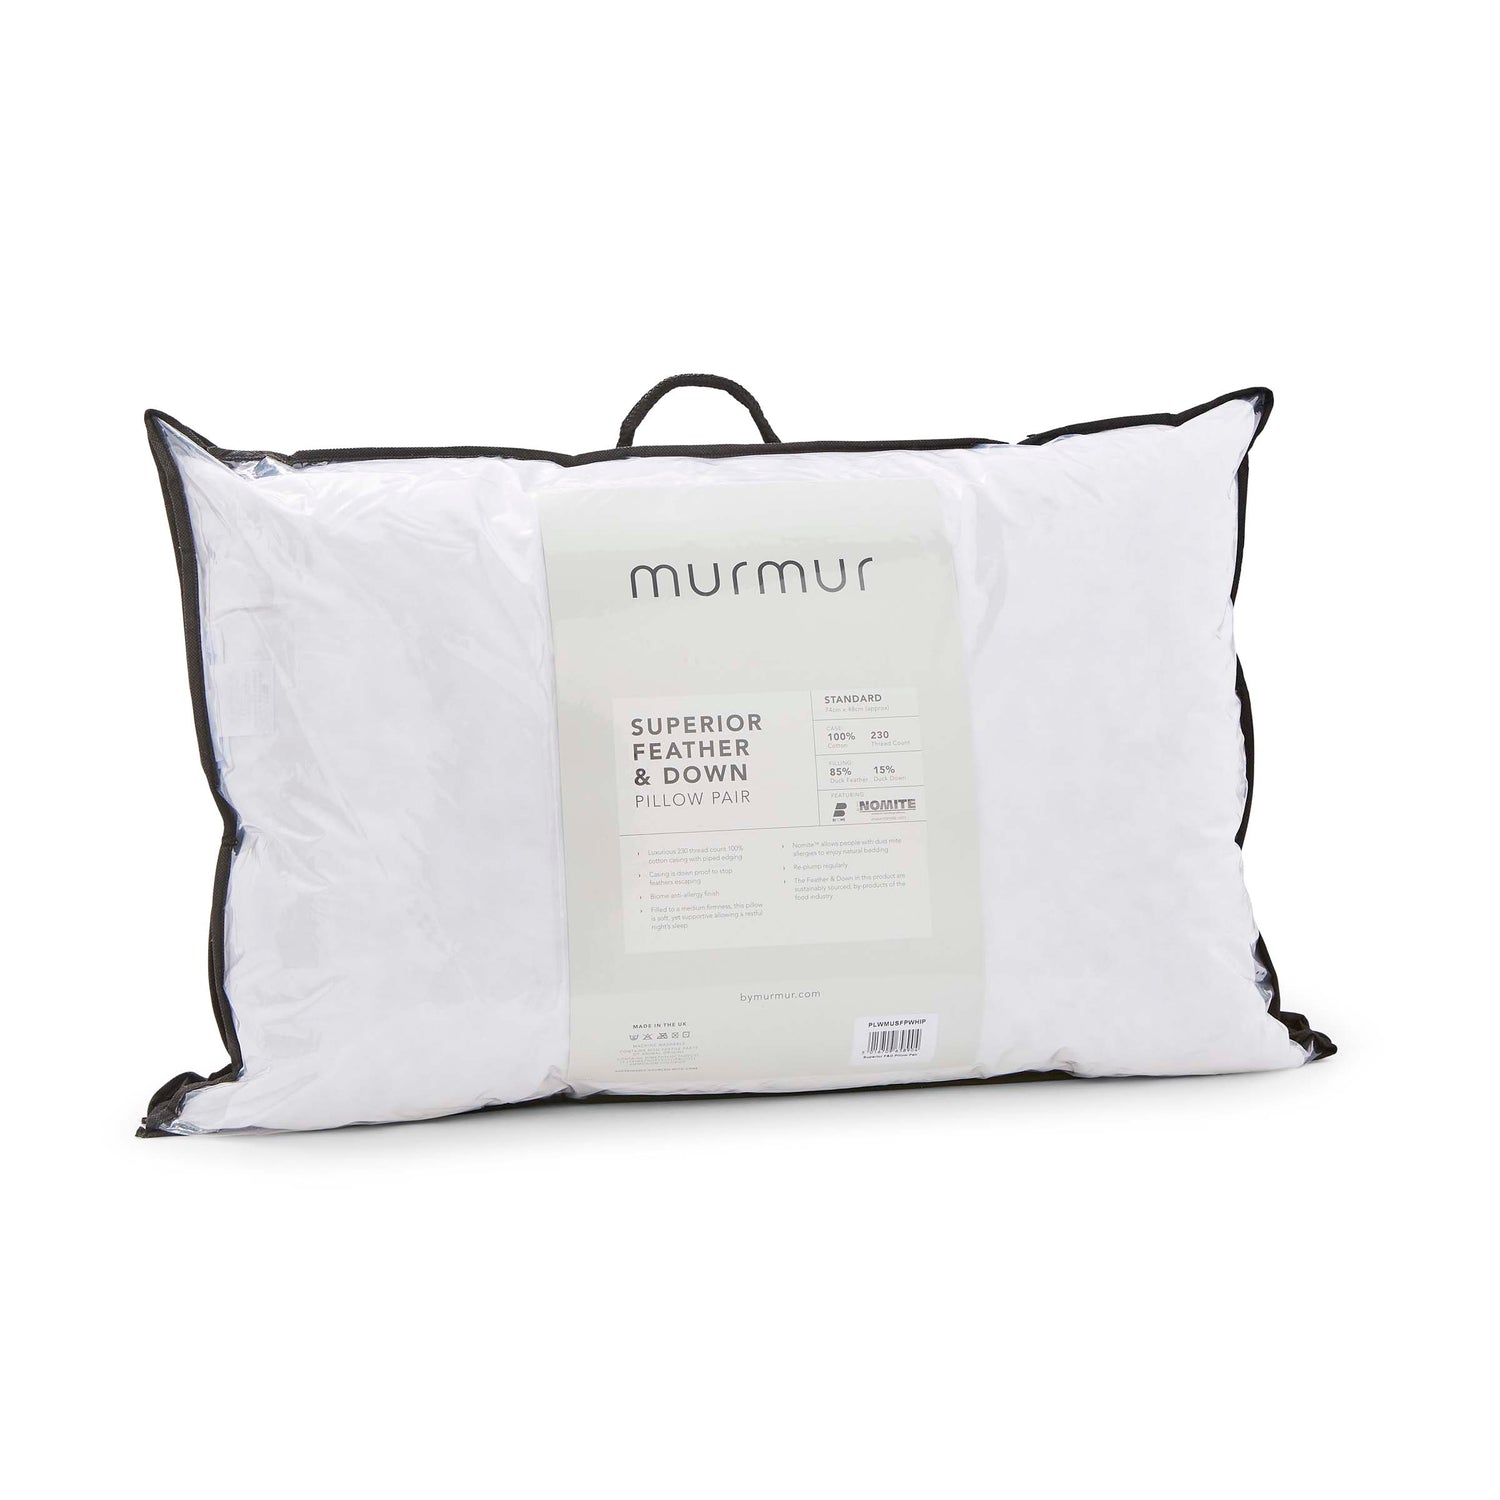 Superior Feather Pillow Pair